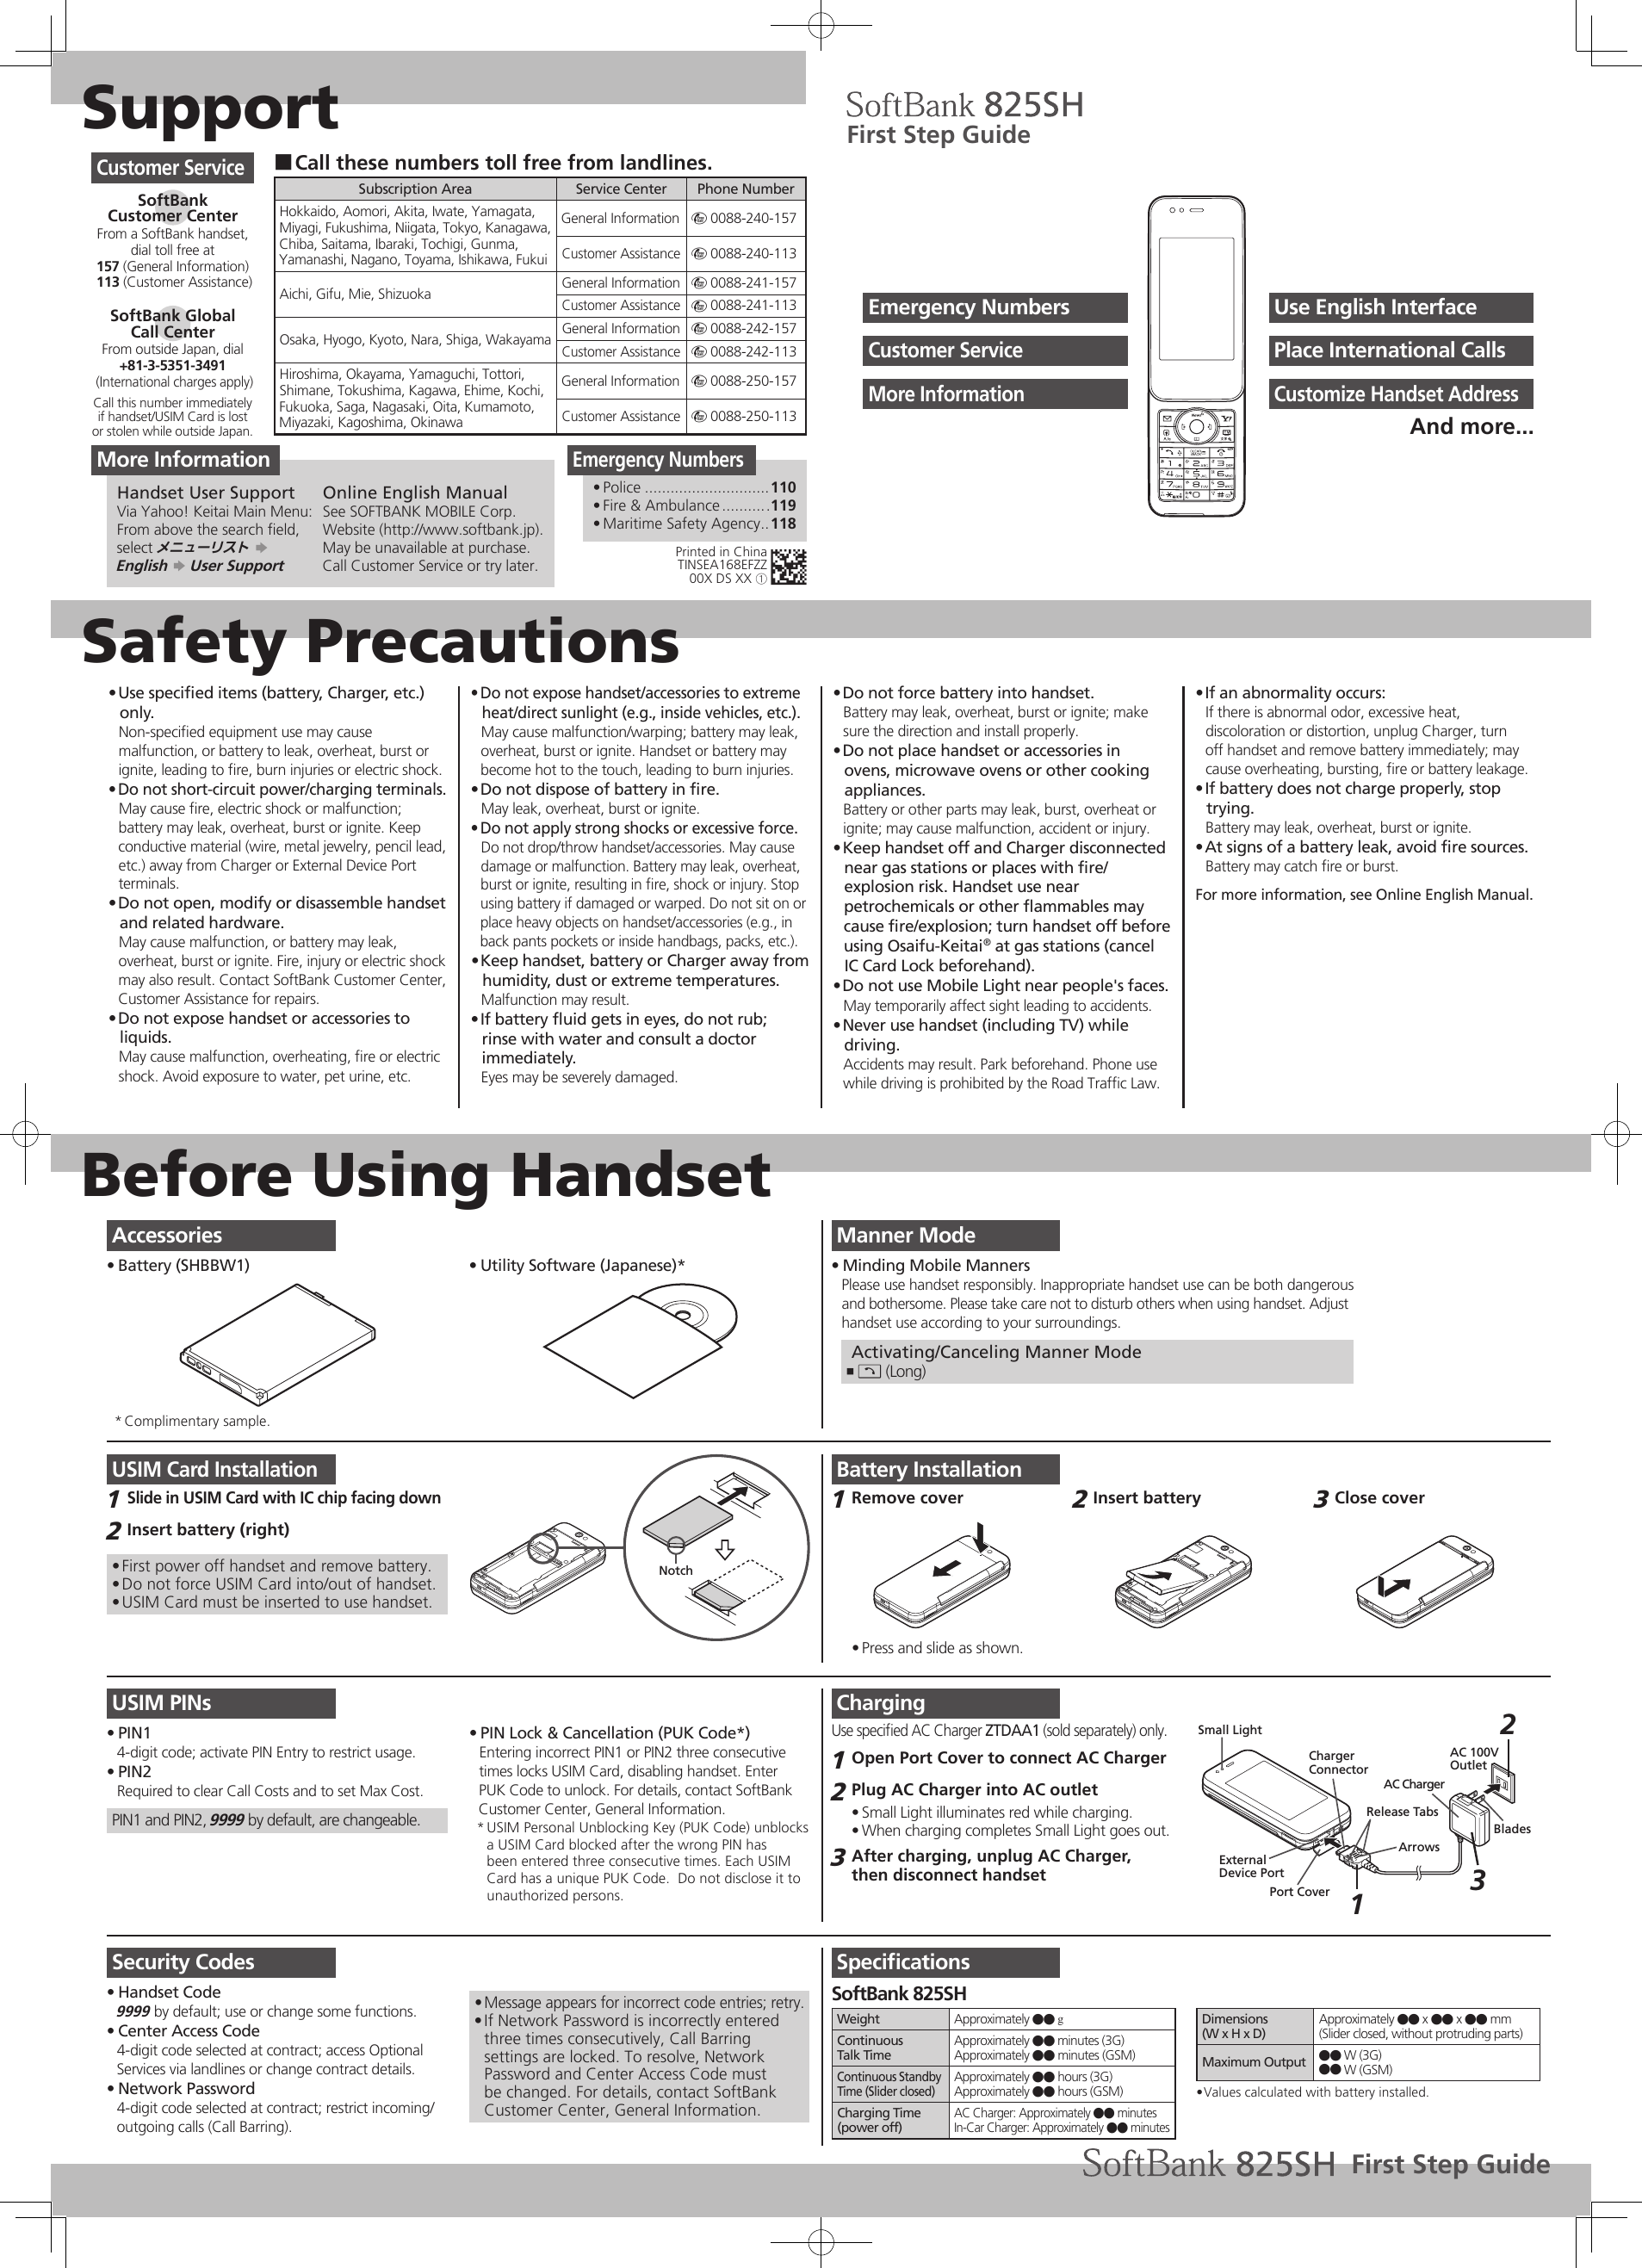 SupportSafety PrecautionsBefore Using HandsetUse speciﬁed items (battery, Charger, etc.) • only.Non-speciﬁed equipment use may cause malfunction, or battery to leak, overheat, burst or ignite, leading to ﬁre, burn injuries or electric shock.Do not short-circuit power/charging terminals.• May cause ﬁre, electric shock or malfunction; battery may leak, overheat, burst or ignite. Keep conductive material (wire, metal jewelry, pencil lead, etc.) away from Charger or External Device Port terminals.Do not open, modify or disassemble handset • and related hardware.May cause malfunction, or battery may leak, overheat, burst or ignite. Fire, injury or electric shock may also result. Contact SoftBank Customer Center, Customer Assistance for repairs.Do not expose handset or accessories to • liquids.May cause malfunction, overheating, ﬁre or electric shock. Avoid exposure to water, pet urine, etc.Do not expose handset/accessories to extreme • heat/direct sunlight (e.g., inside vehicles, etc.).May cause malfunction/warping; battery may leak, overheat, burst or ignite. Handset or battery may become hot to the touch, leading to burn injuries.Do not dispose of battery in ﬁre.• May leak, overheat, burst or ignite.Do not apply strong shocks or excessive force.• Do not drop/throw handset/accessories. May cause damage or malfunction. Battery may leak, overheat, burst or ignite, resulting in ﬁre, shock or injury. Stop using battery if damaged or warped. Do not sit on or place heavy objects on handset/accessories (e.g., in back pants pockets or inside handbags, packs, etc.).Keep handset, battery or Charger away from • humidity, dust or extreme temperatures.Malfunction may result.If battery ﬂuid gets in eyes, do not rub; • rinse with water and consult a doctor immediately.Eyes may be severely damaged.Do not force battery into handset.• Battery may leak, overheat, burst or ignite; make sure the direction and install properly.Do not place handset or accessories in • ovens, microwave ovens or other cooking appliances.Battery or other parts may leak, burst, overheat or ignite; may cause malfunction, accident or injury.Keep handset off and Charger disconnected  • near gas stations or places with ﬁre/explosion risk. Handset use near petrochemicals or other ﬂammables may cause ﬁre/explosion; turn handset off before using Osaifu-Keitai® at gas stations (cancel IC Card Lock beforehand).Do not use Mobile Light near people&apos;s faces.• May temporarily affect sight leading to accidents.Never use handset (including TV) while • driving.Accidents may result. Park beforehand. Phone use while driving is prohibited by the Road Trafﬁc Law.If an abnormality occurs:• If there is abnormal odor, excessive heat, discoloration or distortion, unplug Charger, turn off handset and remove battery immediately; may cause overheating, bursting, ﬁre or battery leakage.If battery does not charge properly, stop • trying.Battery may leak, overheat, burst or ignite.At signs of a battery leak, avoid ﬁre sources.• Battery may catch ﬁre or burst.For more information, see Online English Manual.Manner ModeMinding Mobile Manners• Please use handset responsibly. Inappropriate handset use can be both dangerousand bothersome. Please take care not to disturb others when using handset. Adjusthandset use according to your surroundings. Activating/Canceling Manner ModeI ,  (Long)USIM Card InstallationSlide in USIM Card with IC chip facing down1 Insert battery (right)2 First power off handset and remove battery.• Do not force USIM Card into/out of handset.• USIM Card must be inserted to use handset.• NotchUSIM PINsPIN1• 4-digit code; activate PIN Entry to restrict usage.PIN2• Required to clear Call Costs and to set Max Cost.PIN1 and PIN2, 9999 by default, are changeable.PIN Lock &amp; Cancellation (PUK Code*)• Entering incorrect PIN1 or PIN2 three consecutivetimes locks USIM Card, disabling handset. EnterPUK Code to unlock. For details, contact SoftBank Customer Center, General Information.USIM Personal Unblocking Key (PUK Code) unblocks * a USIM Card blocked after the wrong PIN has been entered three consecutive times. Each USIM Card has a unique PUK Code.  Do not disclose it to unauthorized persons.Security CodesHandset Code• 9999 by default; use or change some functions.Center Access Code• 4-digit code selected at contract; access Optional Services via landlines or change contract details.Network Password• 4-digit code selected at contract; restrict incoming/outgoing calls (Call Barring).Message appears for incorrect code entries; retry.• If Network Password is incorrectly entered • three times consecutively, Call Barring settings are locked. To resolve, Network Password and Center Access Code must be changed. For details, contact SoftBank Customer Center, General Information.Battery InstallationRemove cover1 Press and slide as shown.• Insert battery2 Close cover3 ChargingUse speciﬁed AC Charger ZTDAA1 (sold separately) only.Open Port Cover to connect AC Charger1 Plug AC Charger into AC outlet2 Small Light illuminates red while charging.• When charging completes Small Light goes out.• After charging, unplug AC Charger, 3 then disconnect handsetBladesAC ChargerPort CoverRelease TabsExternal Device PortArrowsSmall LightCharger ConnectorAC 100VOutlet213SpeciﬁcationsSoftBank 825SHWeight Approximately ●● gContinuousTalk TimeApproximately ●● minutes (3G)Approximately ●● minutes (GSM)Continuous Standby Time (Slider closed)Approximately ●● hours (3G)Approximately ●● hours (GSM)Charging Time(power off)AC Charger: Approximately ●● minutesIn-Car Charger: Approximately ●● minutesDimensions(W x H x D)Approximately ●● x ●● x ●● mm(Slider closed, without protruding parts)Maximum Output ●● W (3G)●● W (GSM)Values calculated with battery installed.• Call these numbers toll free from landlines. ■Subscription Area Service Center Phone NumberHokkaido, Aomori, Akita, Iwate, Yamagata, Miyagi, Fukushima, Niigata, Tokyo, Kanagawa, Chiba, Saitama, Ibaraki, Tochigi, Gunma, Yamanashi, Nagano, Toyama, Ishikawa, FukuiGeneral Information m 0088-240-157Customer Assistance m 0088-240-113Aichi, Gifu, Mie, Shizuoka General Information m 0088-241-157Customer Assistance m 0088-241-113Osaka, Hyogo, Kyoto, Nara, Shiga, Wakayama General Information m 0088-242-157Customer Assistance m 0088-242-113Hiroshima, Okayama, Yamaguchi, Tottori, Shimane, Tokushima, Kagawa, Ehime, Kochi, Fukuoka, Saga, Nagasaki, Oita, Kumamoto, Miyazaki, Kagoshima, OkinawaGeneral Information m 0088-250-157Customer Assistance m 0088-250-113Customer ServiceSoftBank  Customer CenterFrom a SoftBank handset, dial toll free at157 (General Information) 113 (Customer Assistance)SoftBank Global  Call CenterFrom outside Japan, dial+81-3-5351-3491 (International charges apply)Call this number immediatelyif handset/USIM Card is lostor stolen while outside Japan.Emergency NumbersPolice•   .............................110Fire &amp; Ambulance•   ...........119Maritime Safety Agency•   ..118First Step GuideUse English InterfaceEmergency NumbersPlace International CallsCustomer ServiceCustomize Handset AddressMore InformationAnd more...AccessoriesBattery (SHBBW1)•  Utility Software (Japanese)*• Complimentary sample.* Printed in ChinaTINSEA168EFZZ00X DS XX ①More InformationHandset User SupportVia Yahoo! Keitai Main Menu:From above the search ﬁeld, select メニューリスト S  English S User SupportOnline English ManualSee SOFTBANK MOBILE Corp. Website (http://www.softbank.jp).May be unavailable at purchase. Call Customer Service or try later.First Step Guide